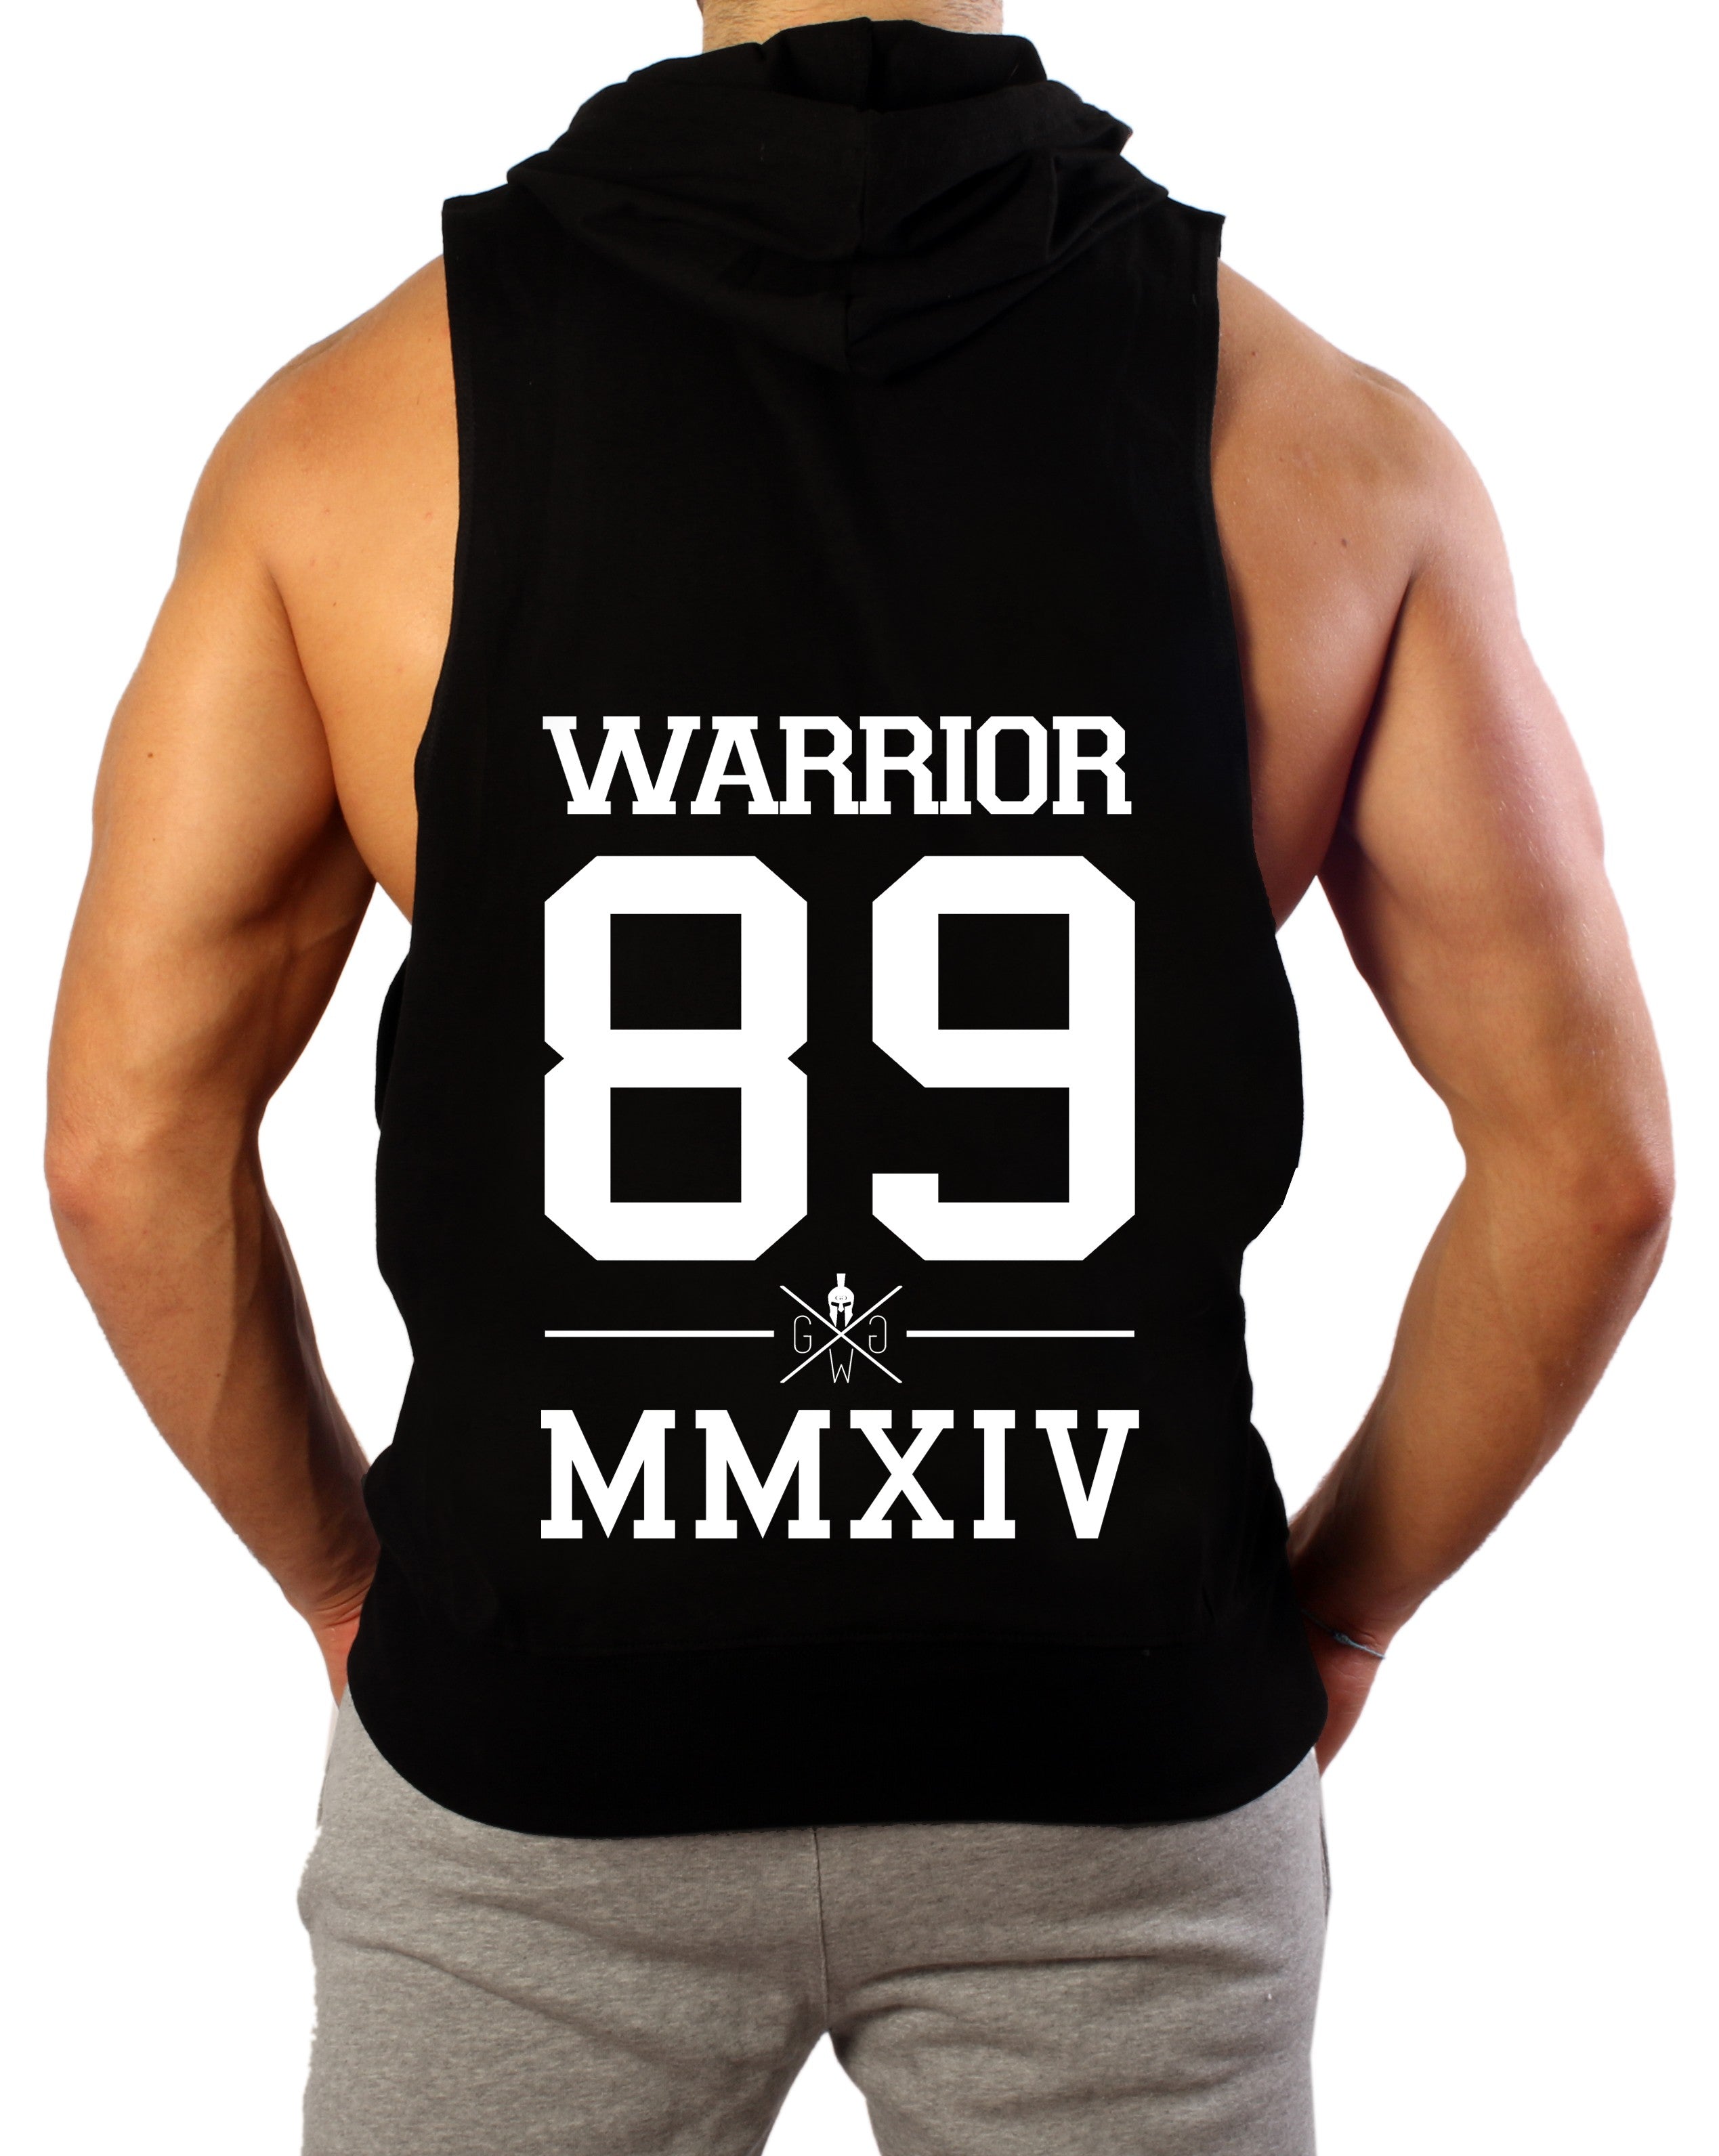 Gym Warriors Gym Hooded Tank Top Men Summer Fitness Clothing Bodybuilding Hoody Vest Mens Sports Fashion Cotton